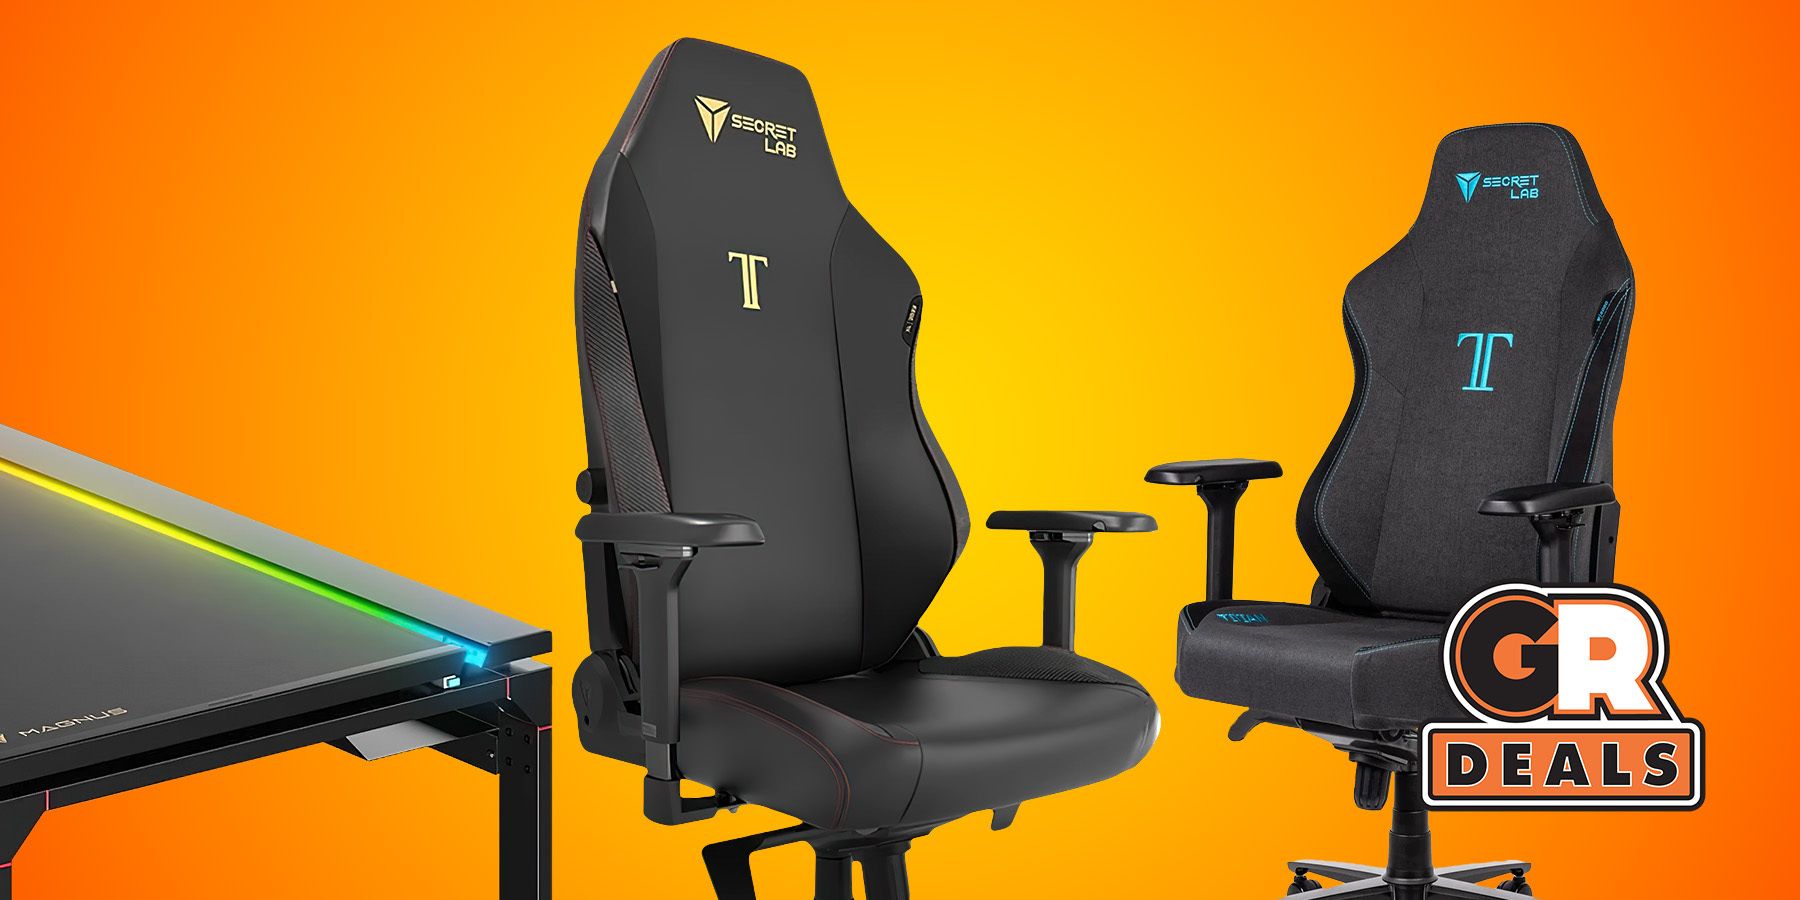 The Secretlab New Years Sale: Up to $100 Off Titan Evo Gaming